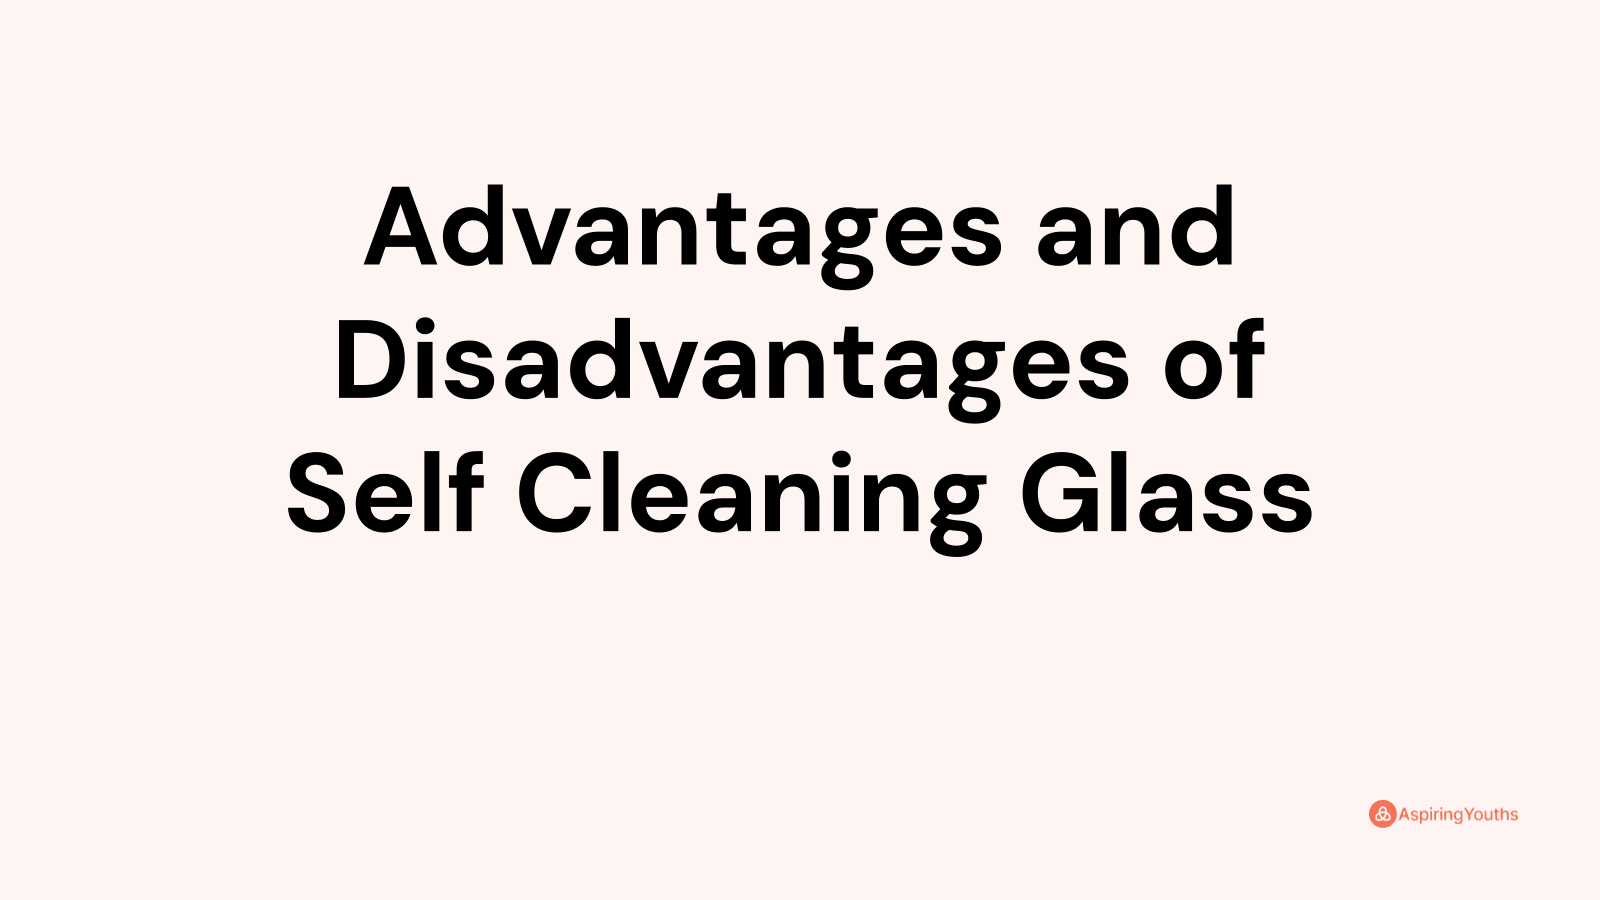 Advantages and disadvantages of Self Cleaning Glass